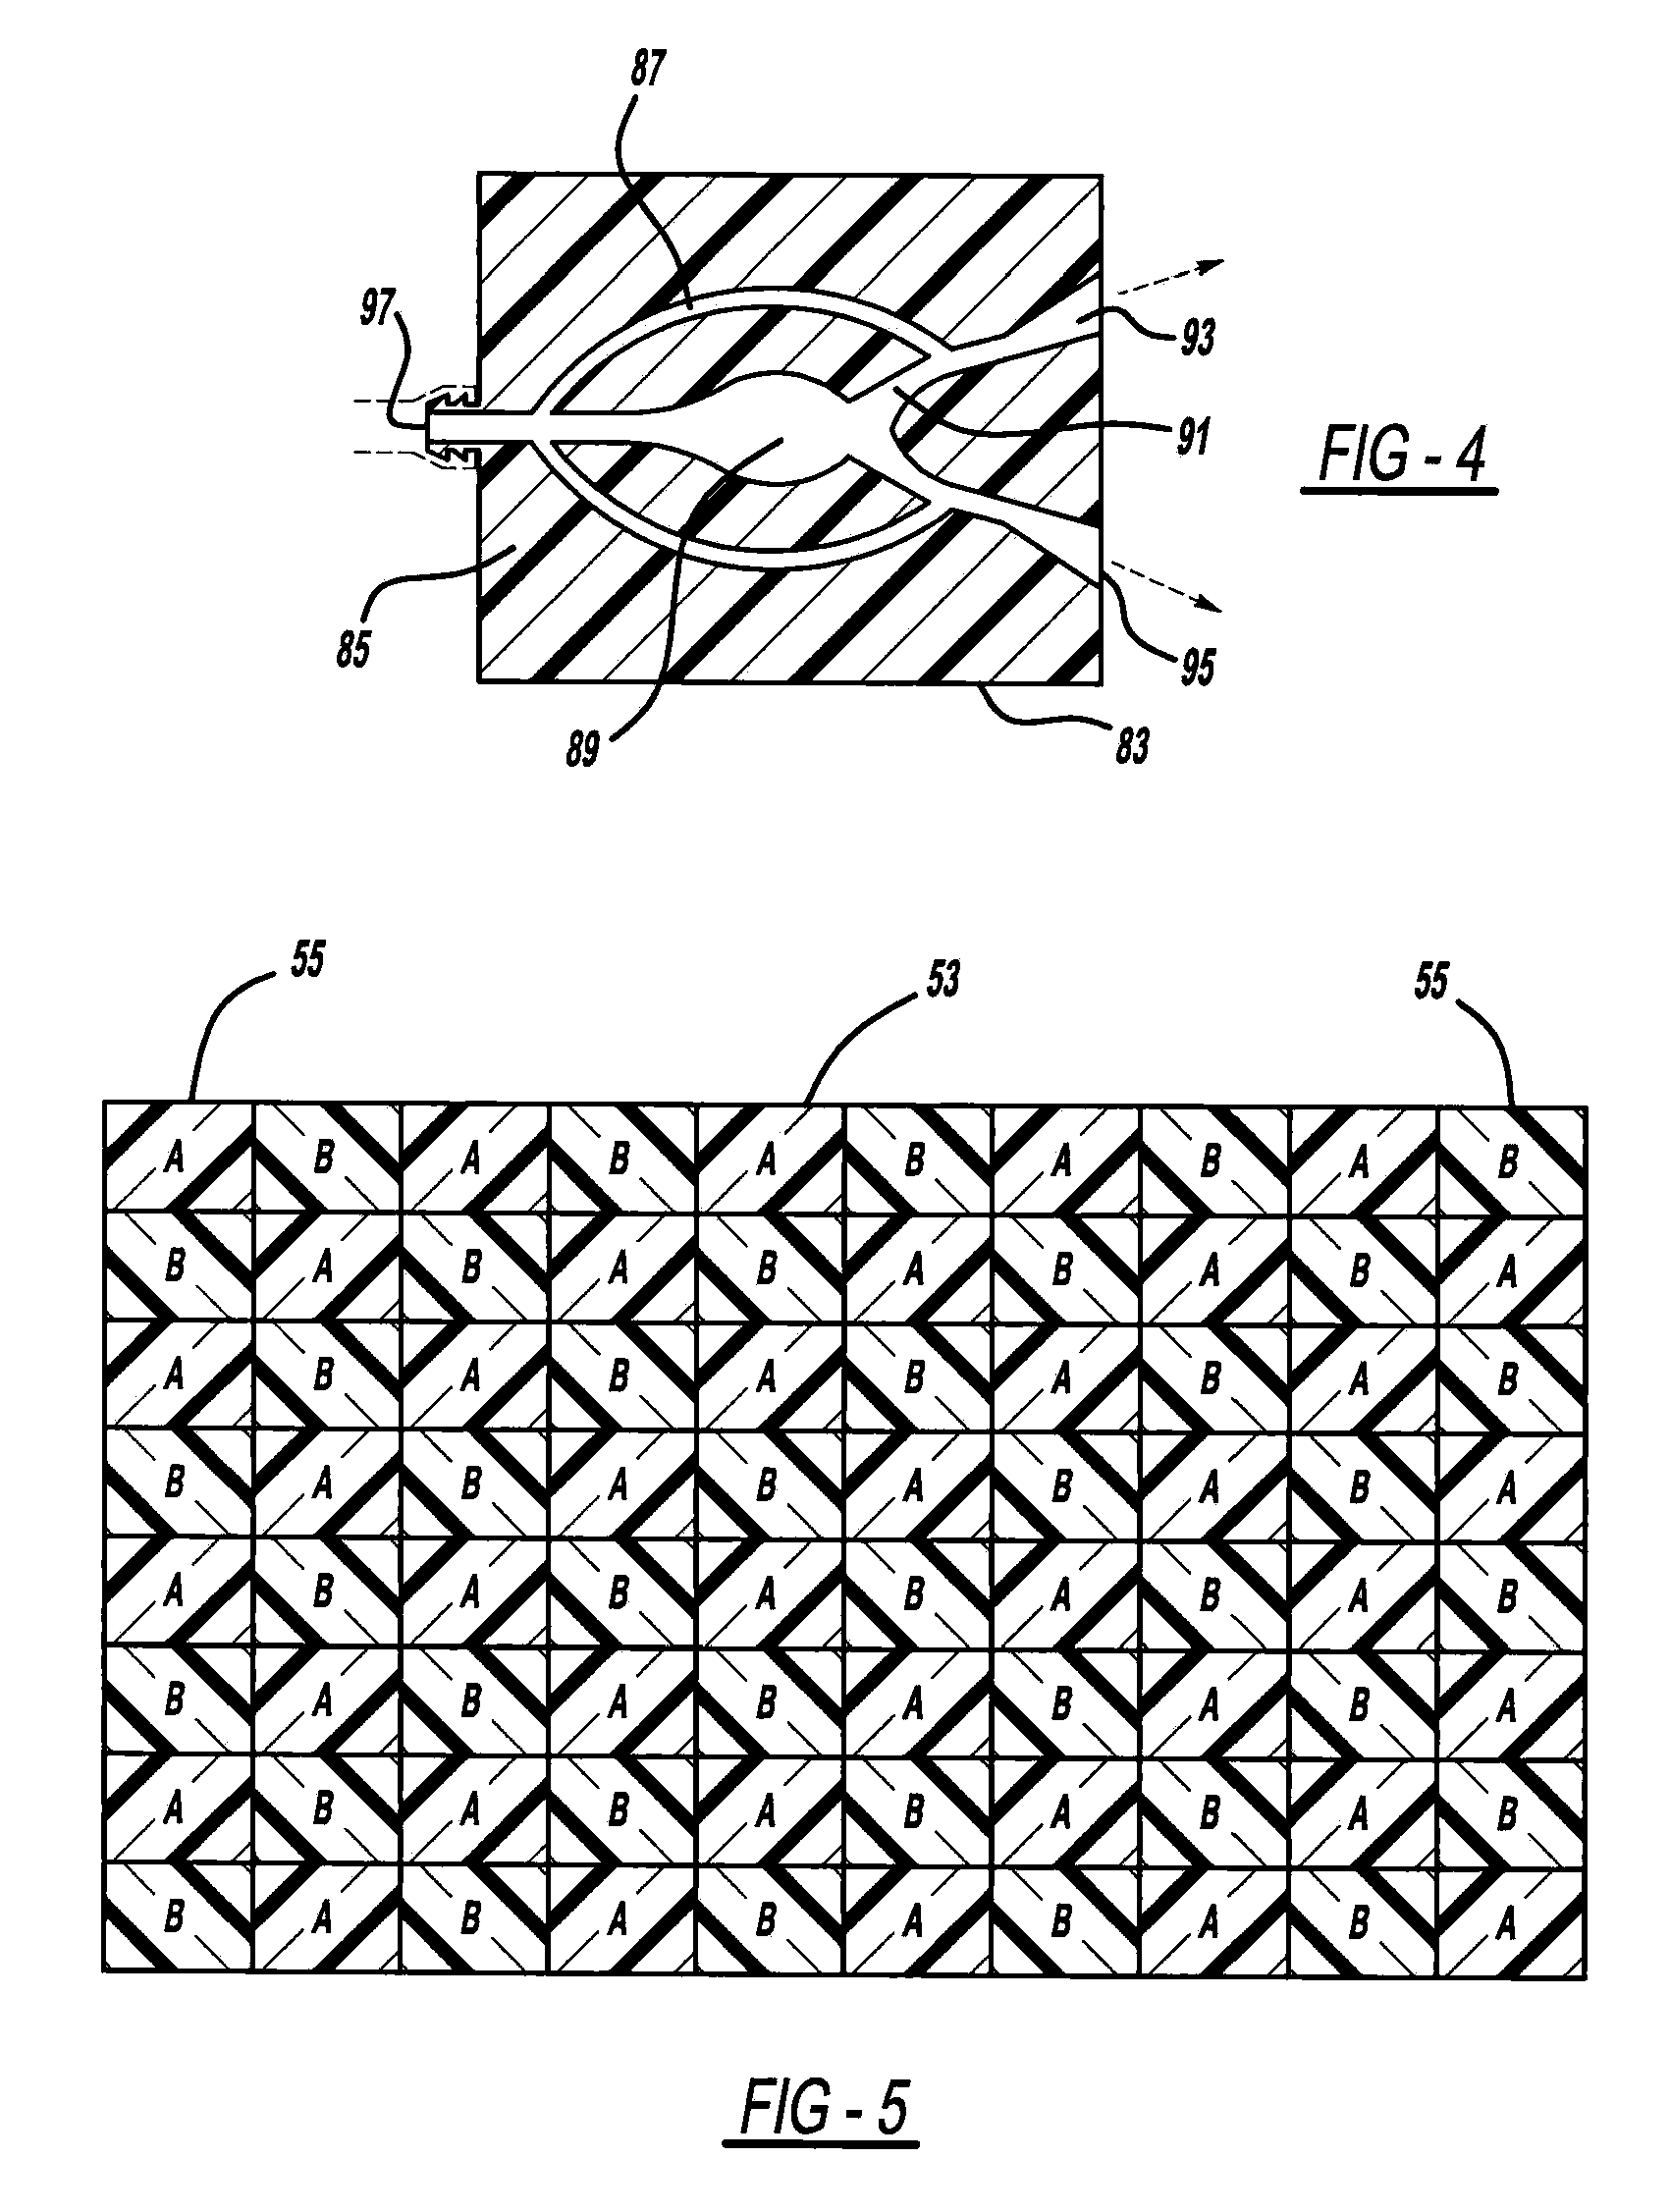 Process of making a component with a passageway